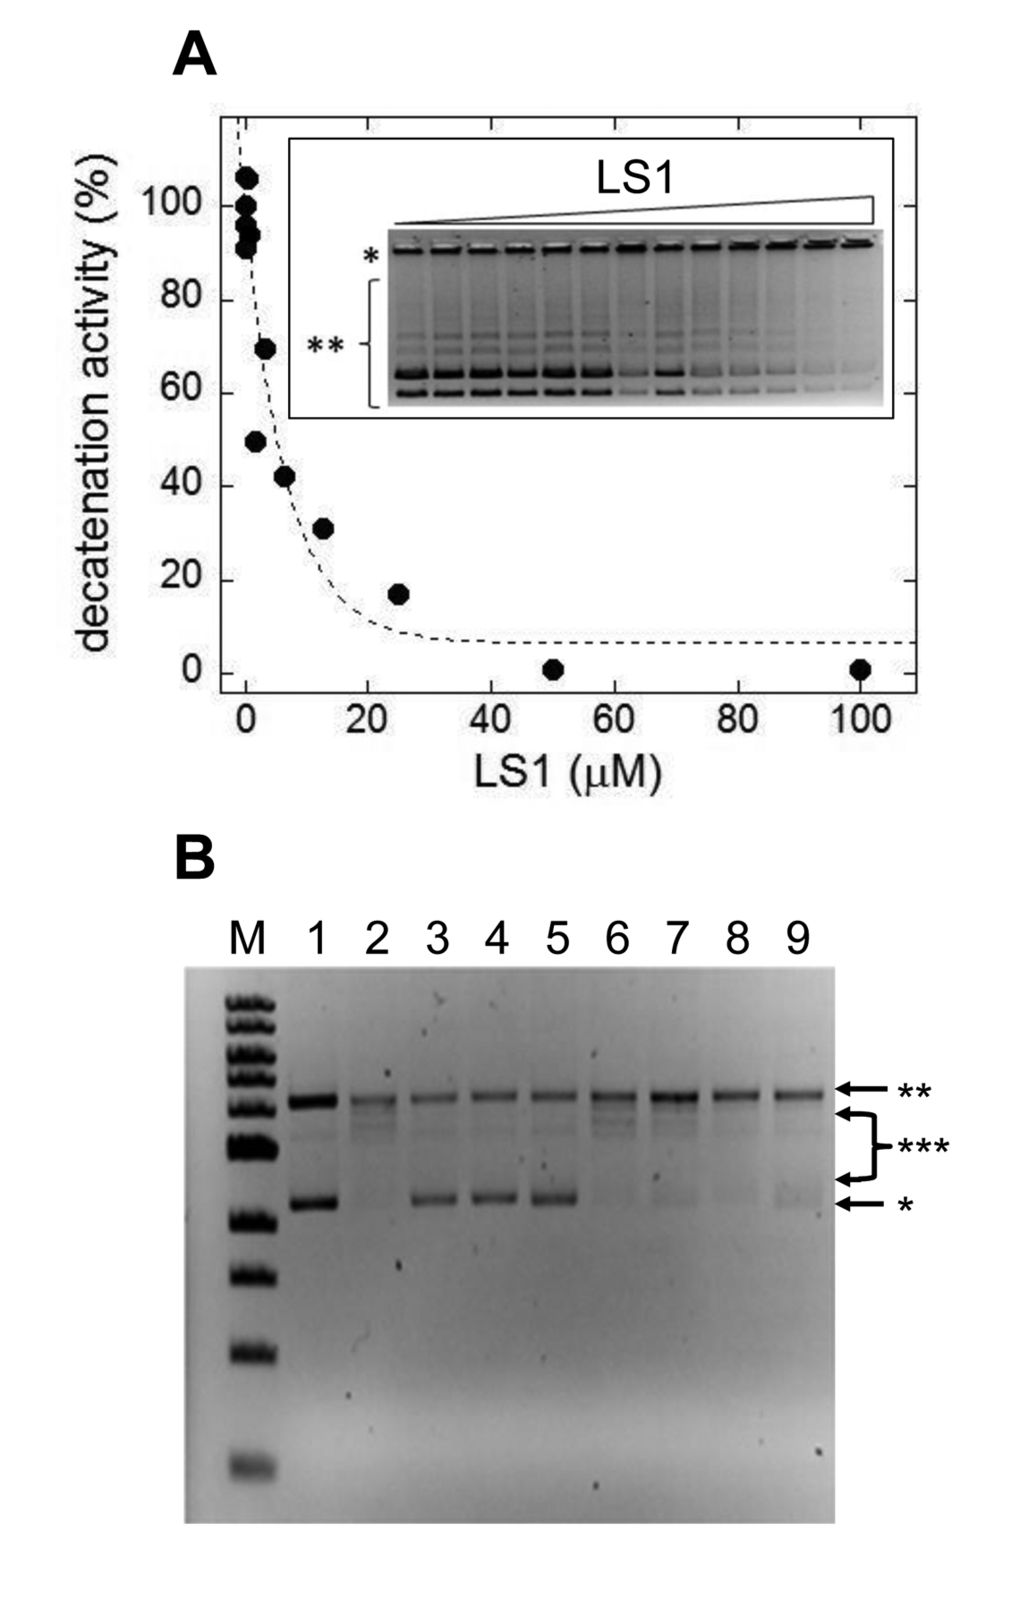 LS1 is a nonintercalating TOP2-α inhibitor. (A) Effect of LS1 on decatenation of C. fasciculata kinetoplastid DNA (kDNA) by purified human TOP2-α. Inset shows a negative image of the ethidium bromide stained agarose gel separating kDNA species. Quantitation of decatenated kDNA was done with GelQuant.NET 1.8.2 software and results were plotted using KaleidaGraph 4.1.0 software. (B) A DNA topoisomerase I (Top1) DNA unwinding assay was used to assess the ability of LS1 to intercalate as indicated in Methods. Known Top2 poisons that either intercalate (doxorubicin) or do not (etoposide) were included as controls. An E. coli-compatible plasmid (puc18) exhibiting both supercoiled (*) and nicked/relaxed (**) forms was used as the substrate (lane 1). In the absence of an intercalator (lane 2) Top1 converts the plasmid to fully nicked/relaxed (**) or intermediate relaxed forms (***). Intercalation was assessed for DOX (10µM or 50µM; lanes 3-4), ELLIP (100µM; lane 5), 100mM ETOP (lane 6) and LS1 (10µM, 50µM, or 100µM; lanes 7-9).